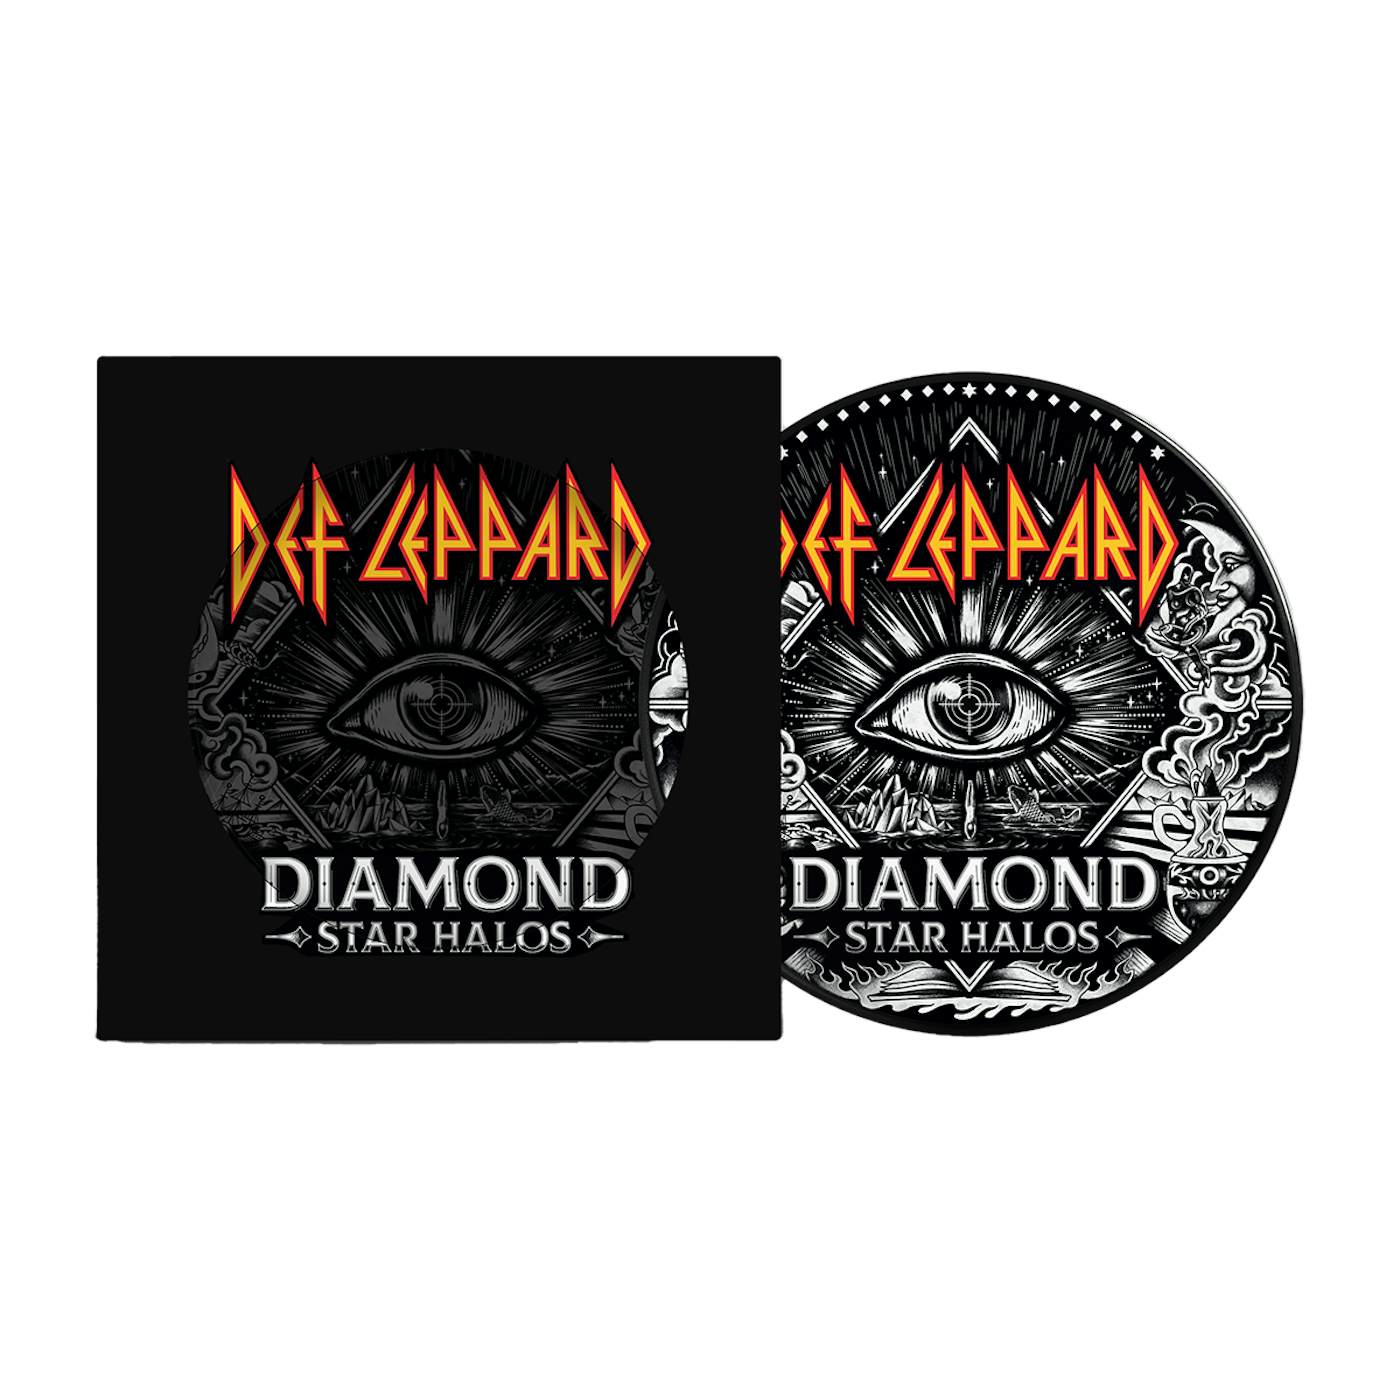 Def Leppard Diamond Star Halos Limited Edition 2LP Picture Disc